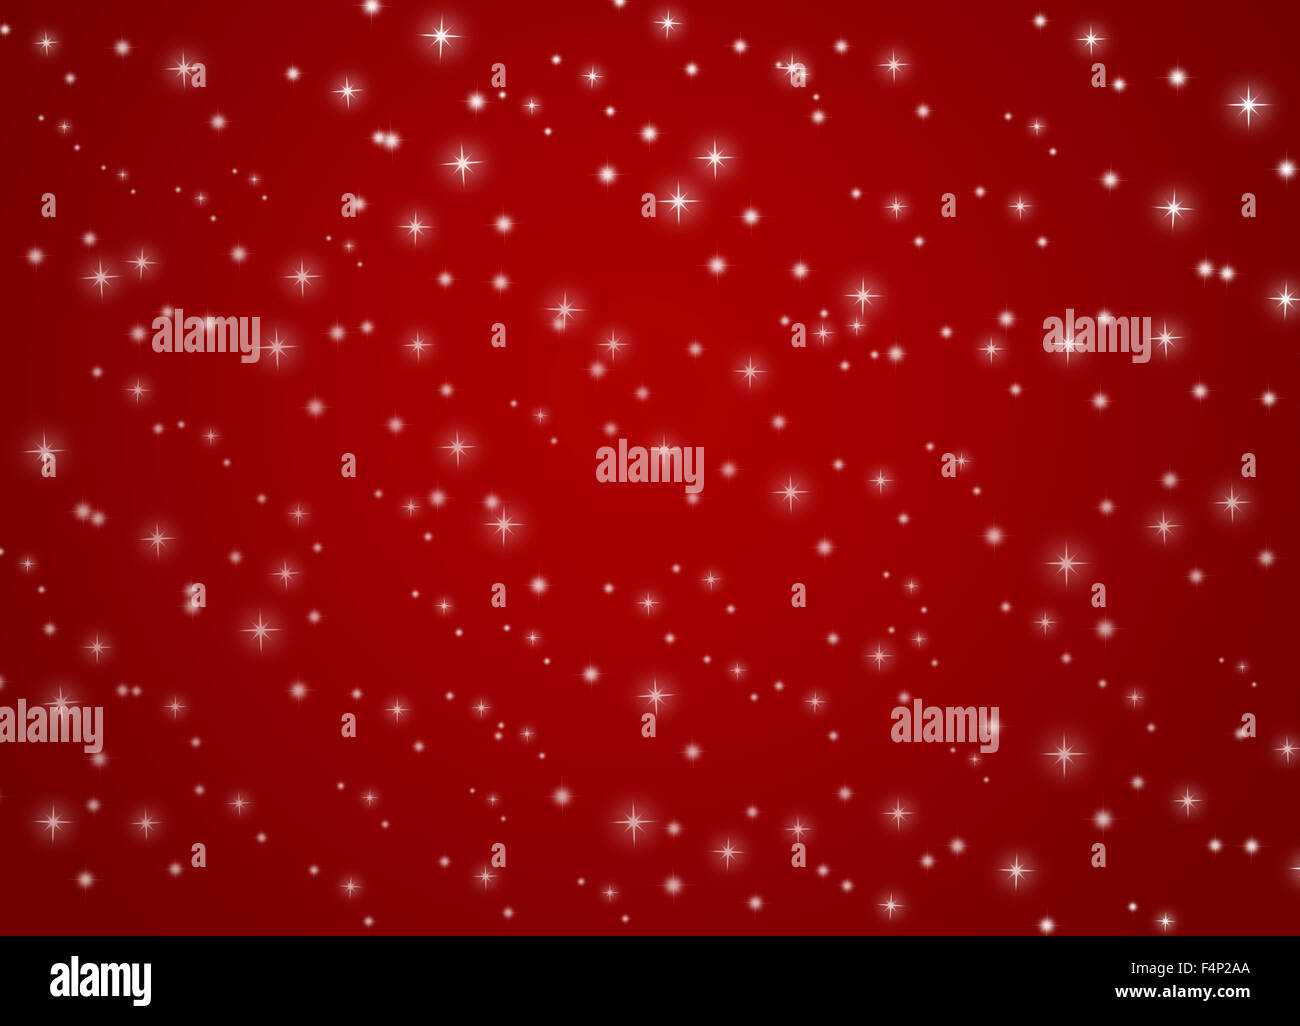 Stars on red christmas background Stock Photo